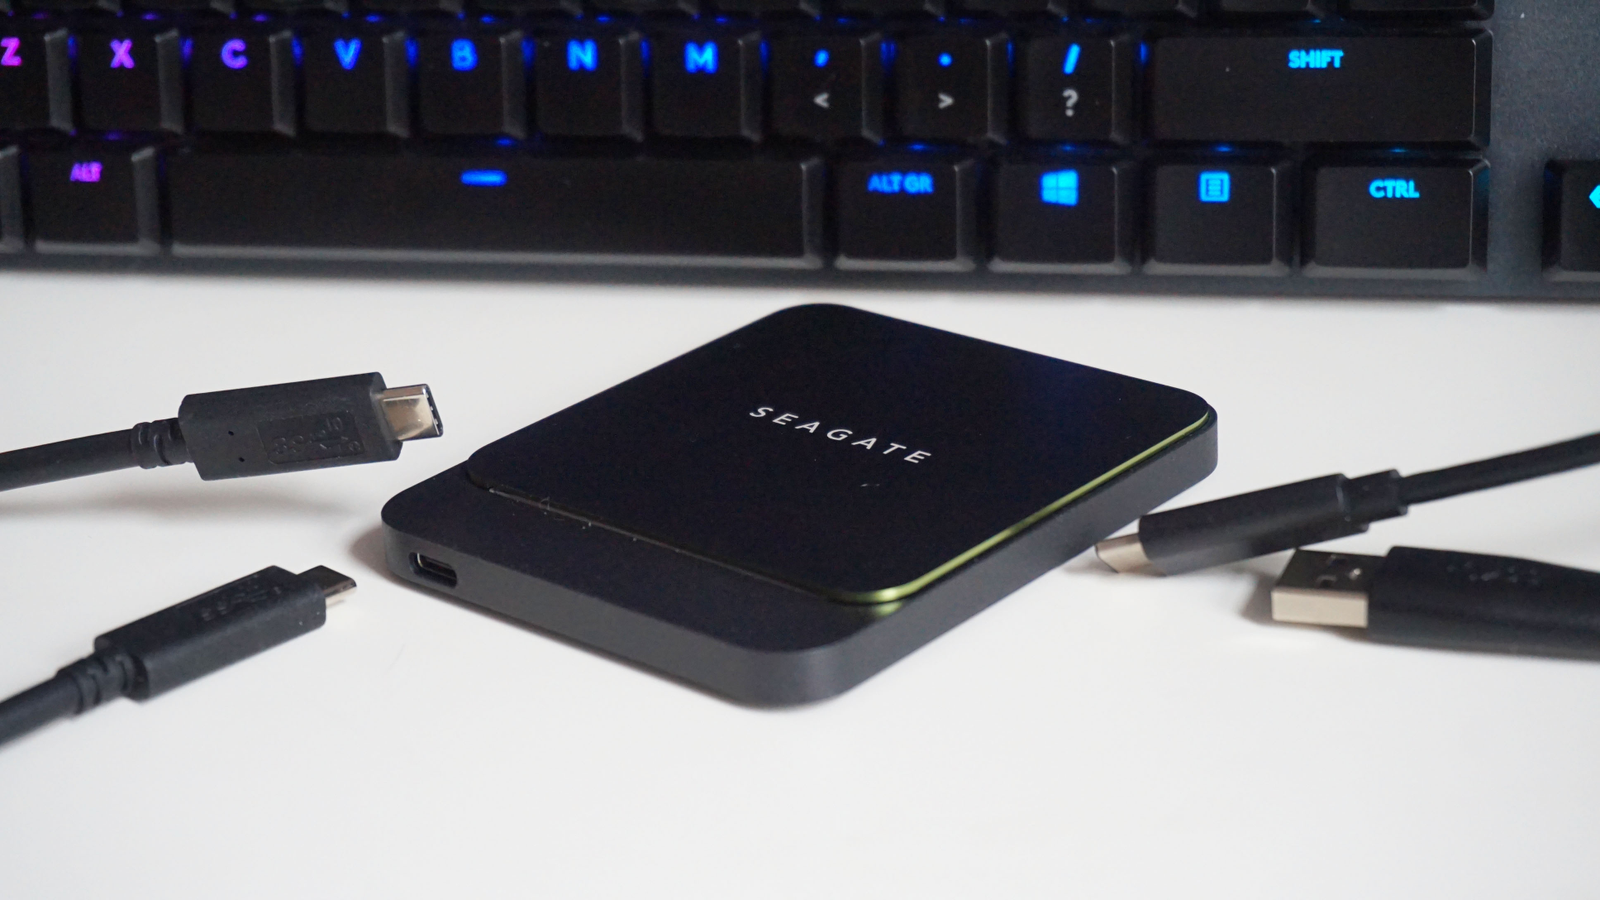 The Seagate BarraCuda (500GB) SSD Review: Getting Back In The Game